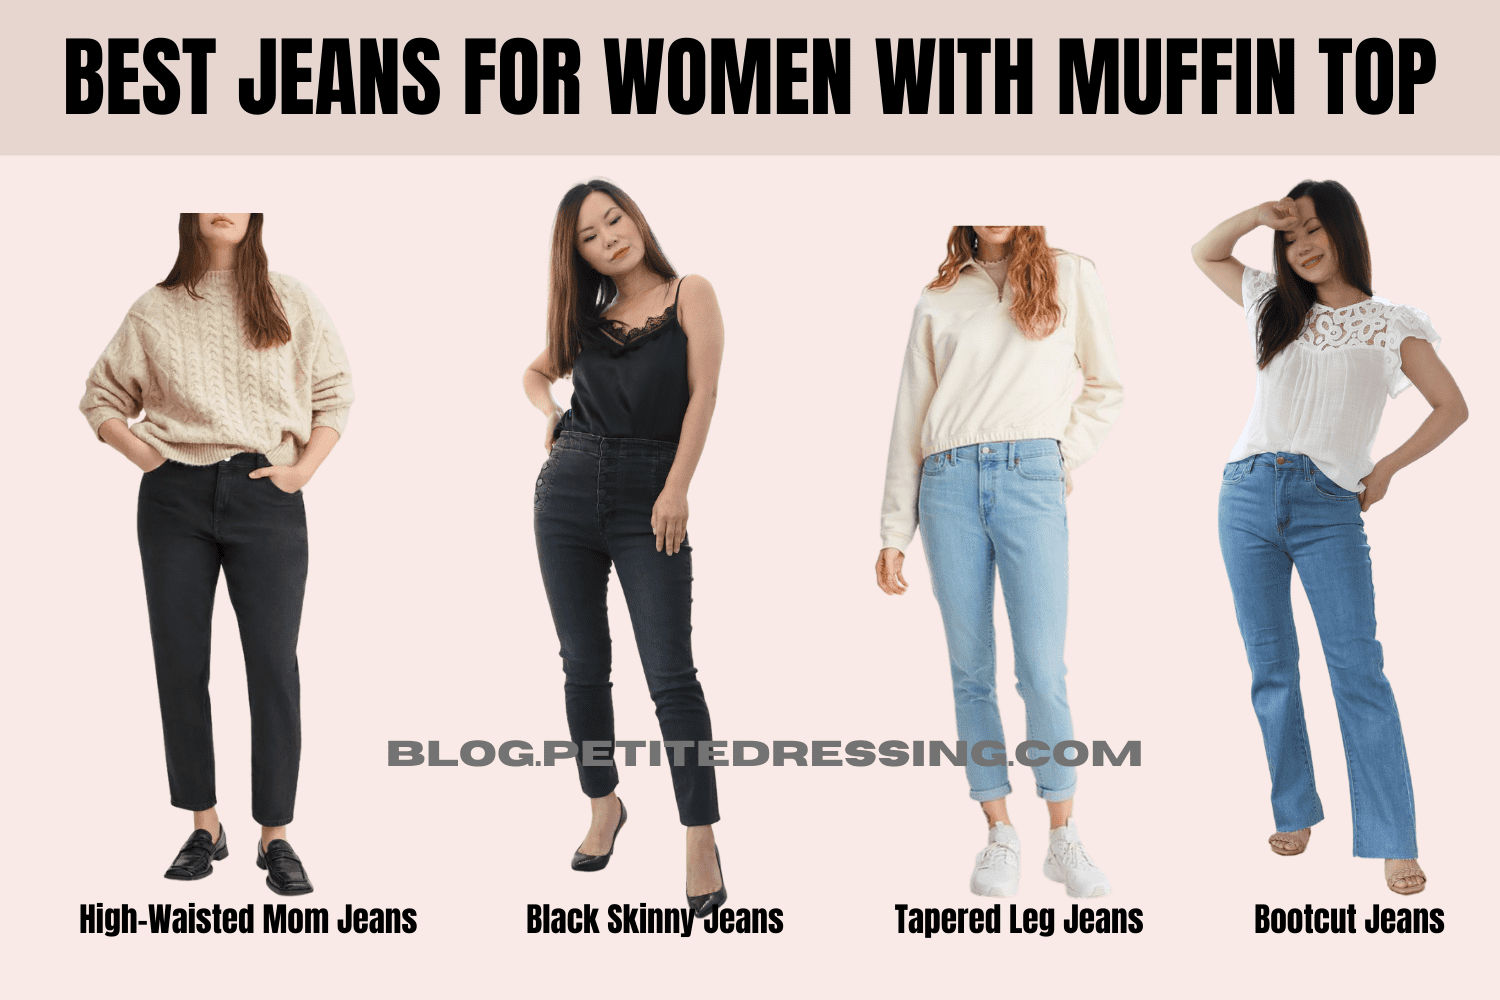 The Complete Jeans Guide for Women with Muffin Top